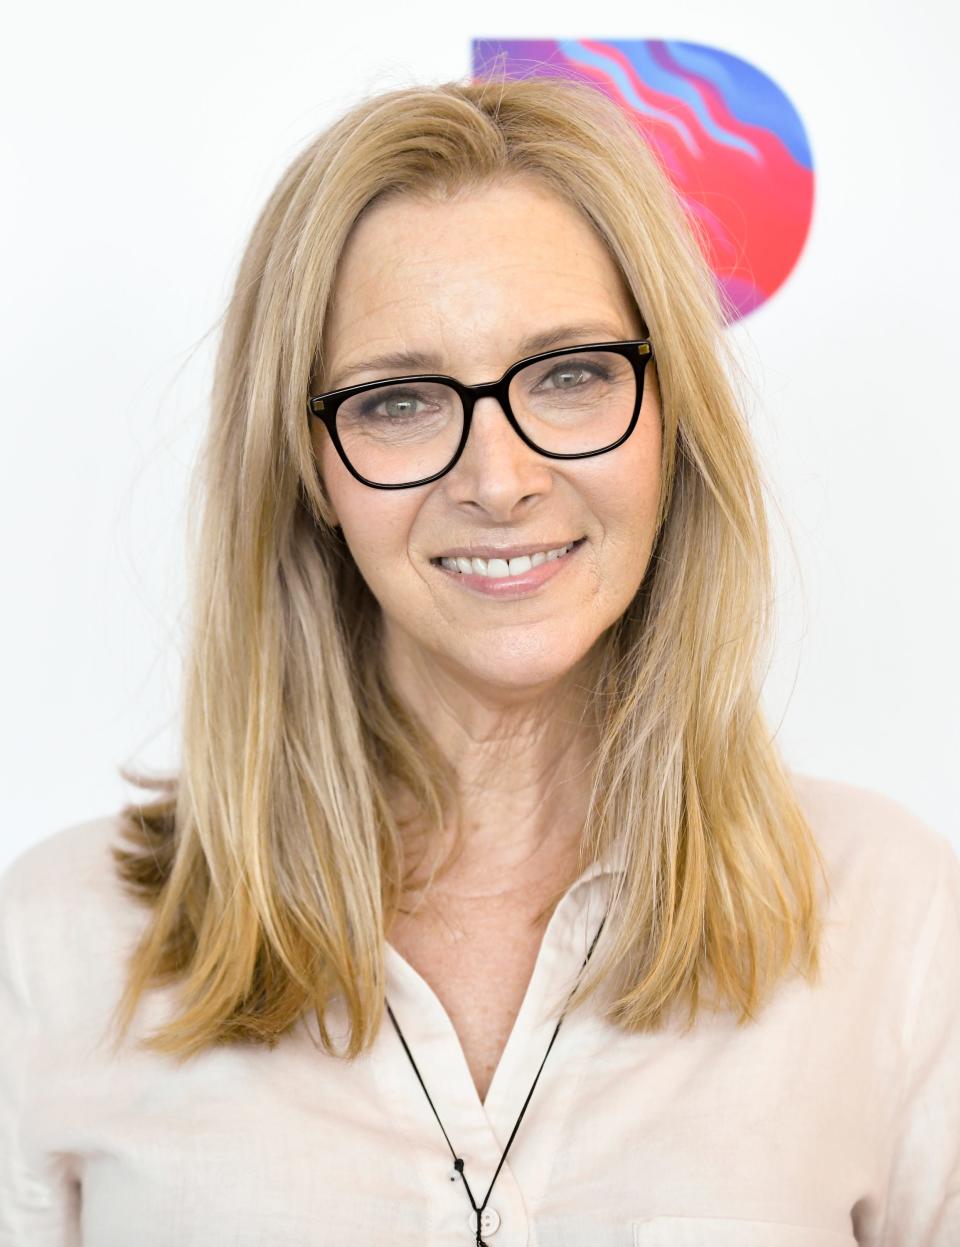 LOS ANGELES, CALIFORNIA - JUNE 28: Lisa Kudrow visits the SiriusXM Hollywood Studio on June 28, 2022 in Los Angeles, California. (Photo by Rodin Eckenroth/Getty Images) ORG XMIT: 775832731 ORIG FILE ID: 1405693556